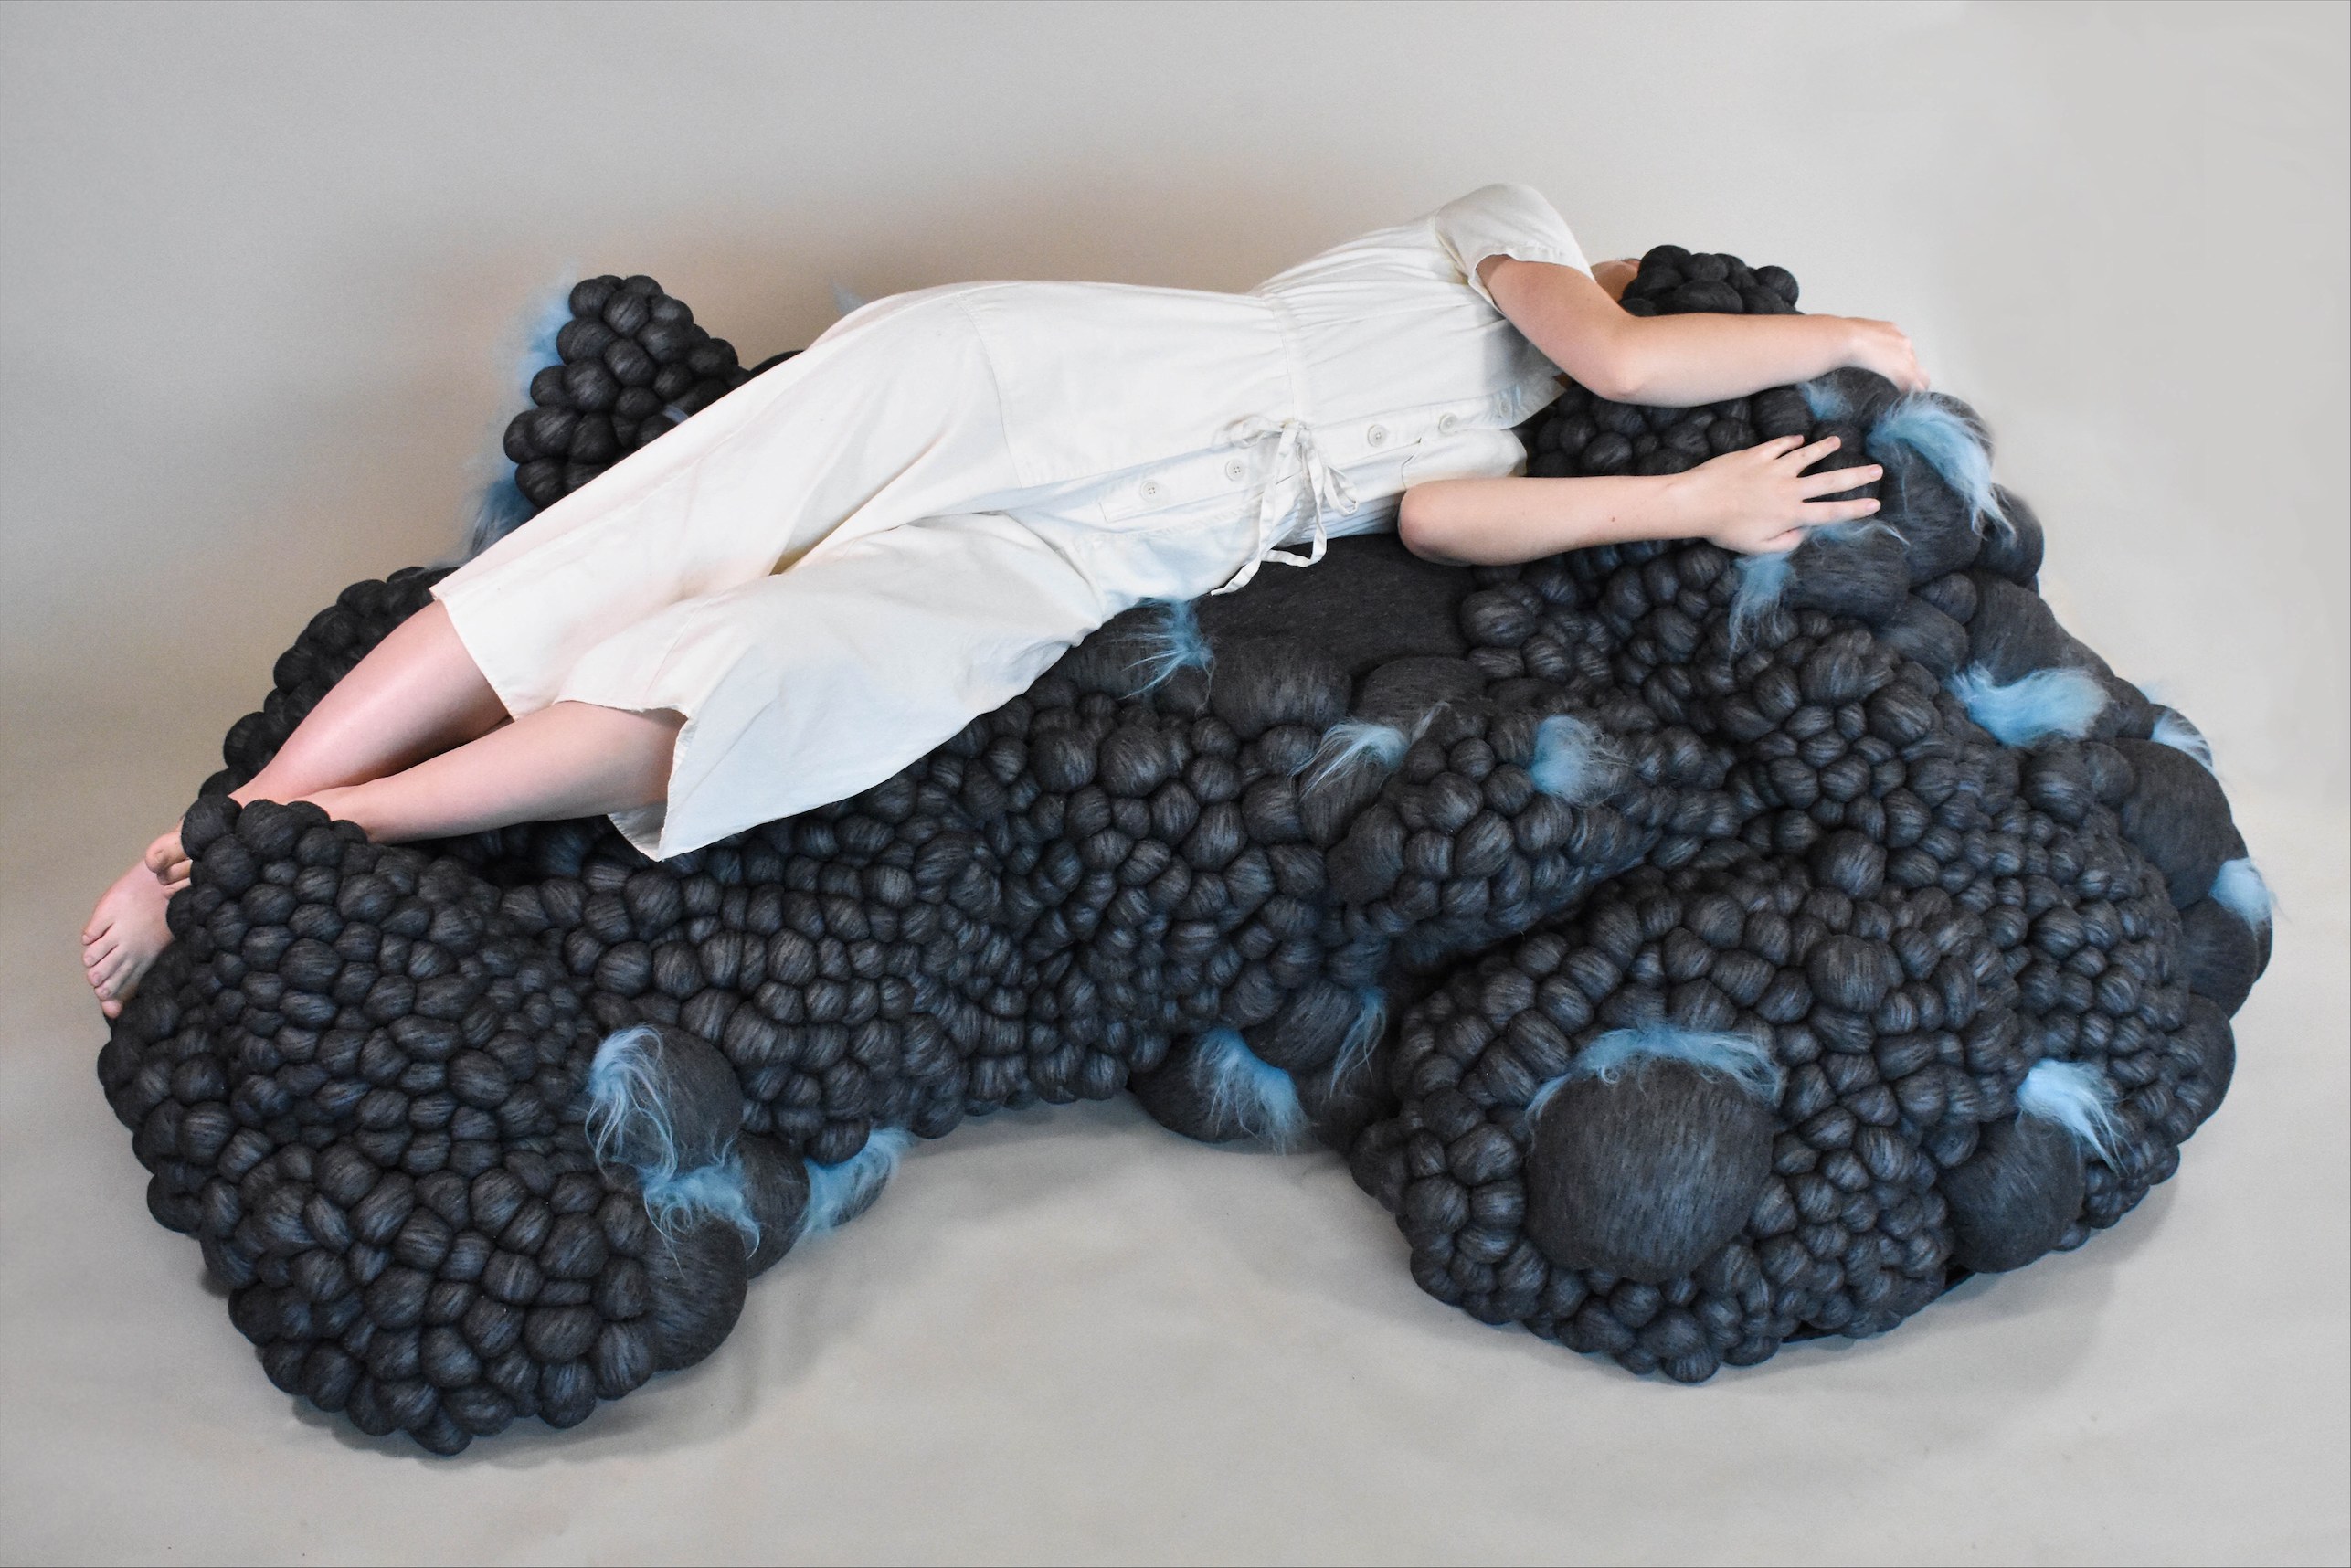 A person reclines on an organic-looking seating system composed of black nodules and tufts of blue fur